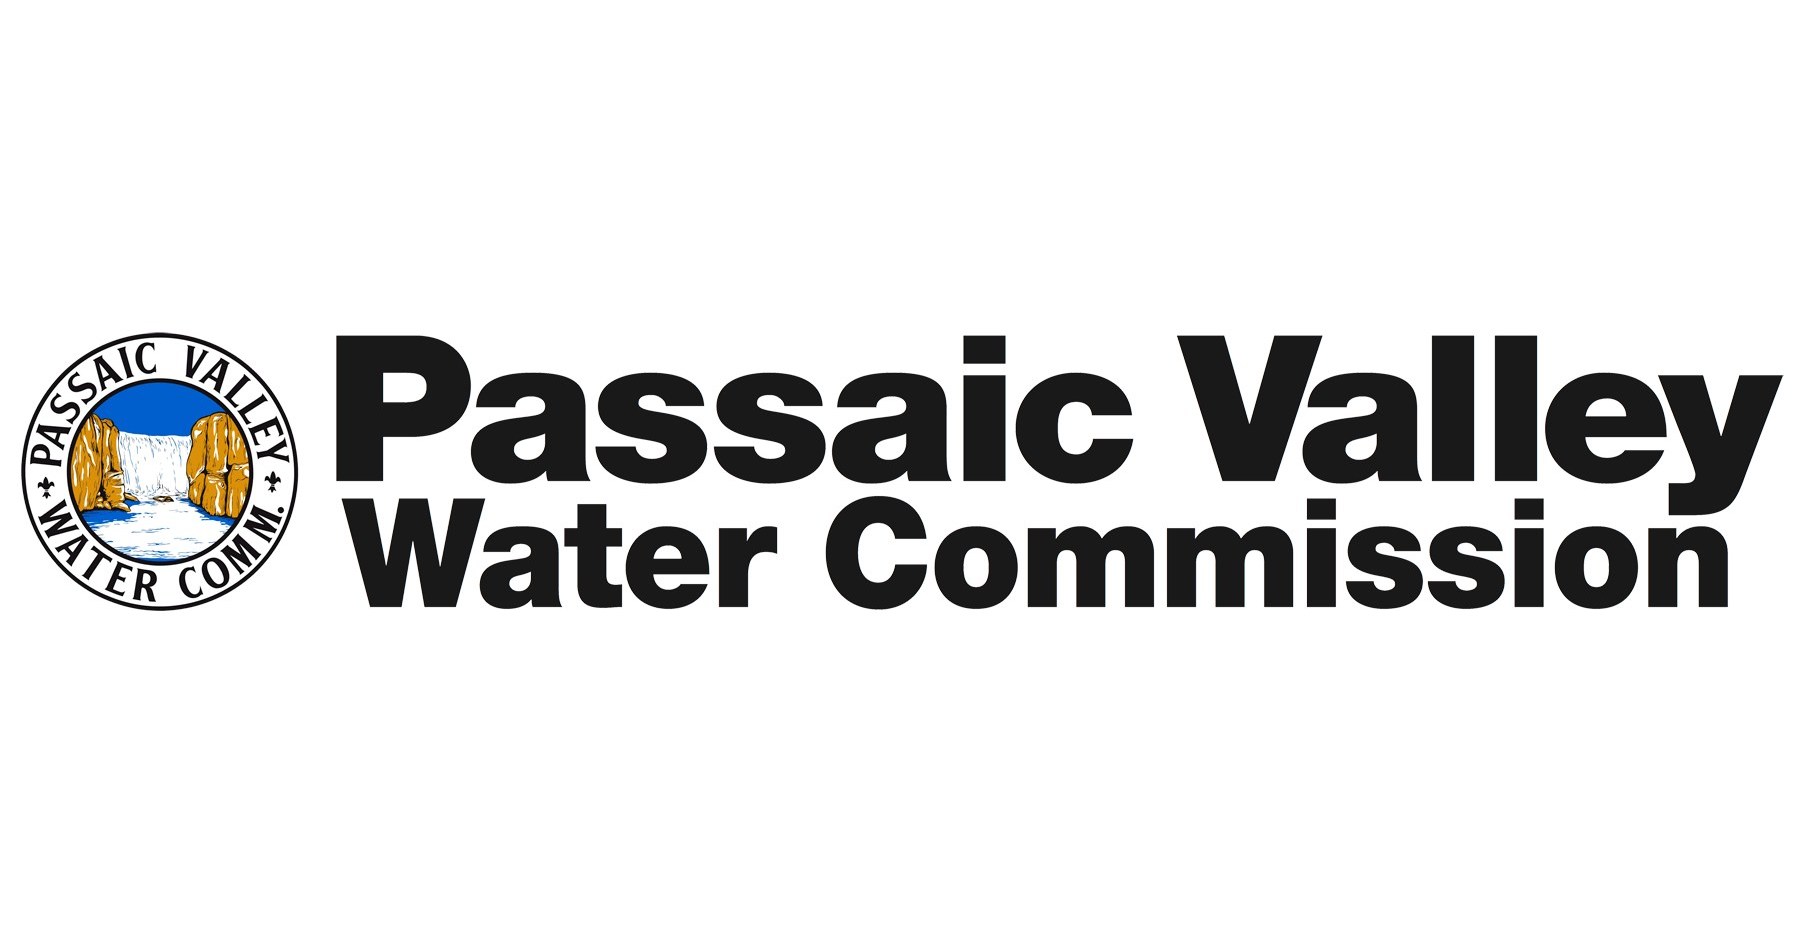 Passaic Valley Water Commission Announces Water Bill Assistance Program